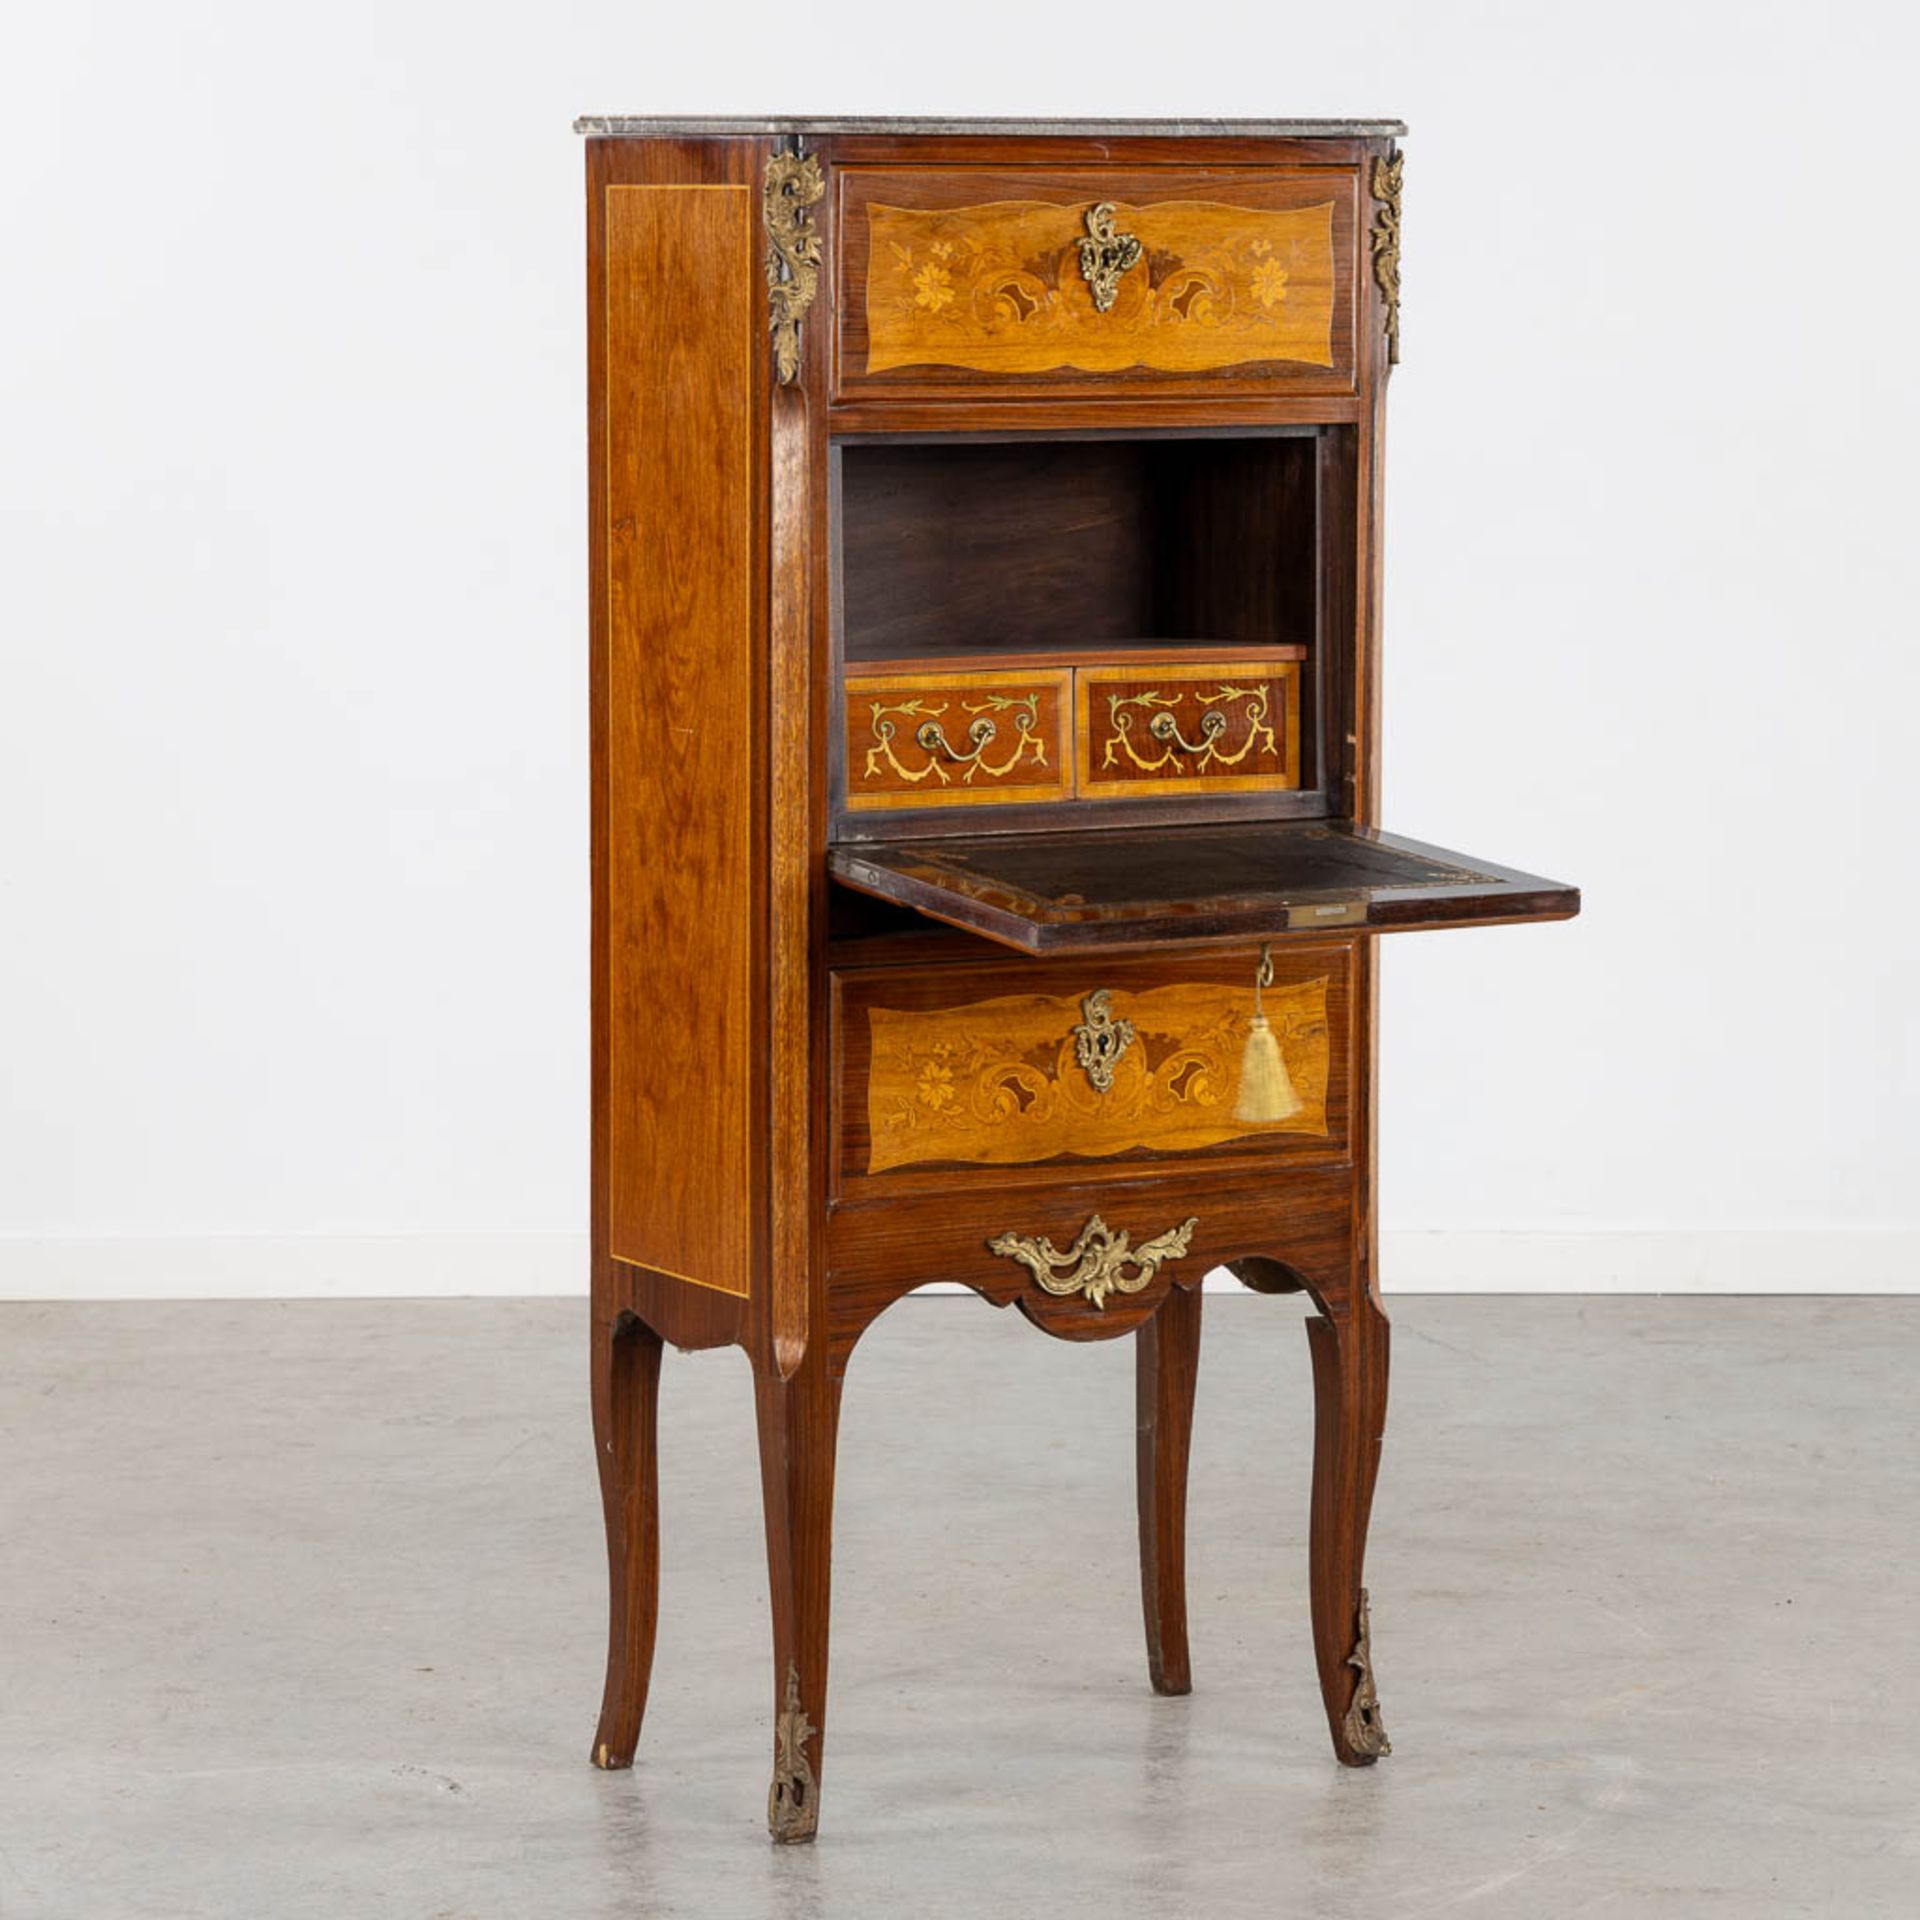 A Secretaire cabinet, Marquetry inlay and mounted with bronze. Circa 1900. (L:34 x W:56 x H:128 cm) - Bild 3 aus 15